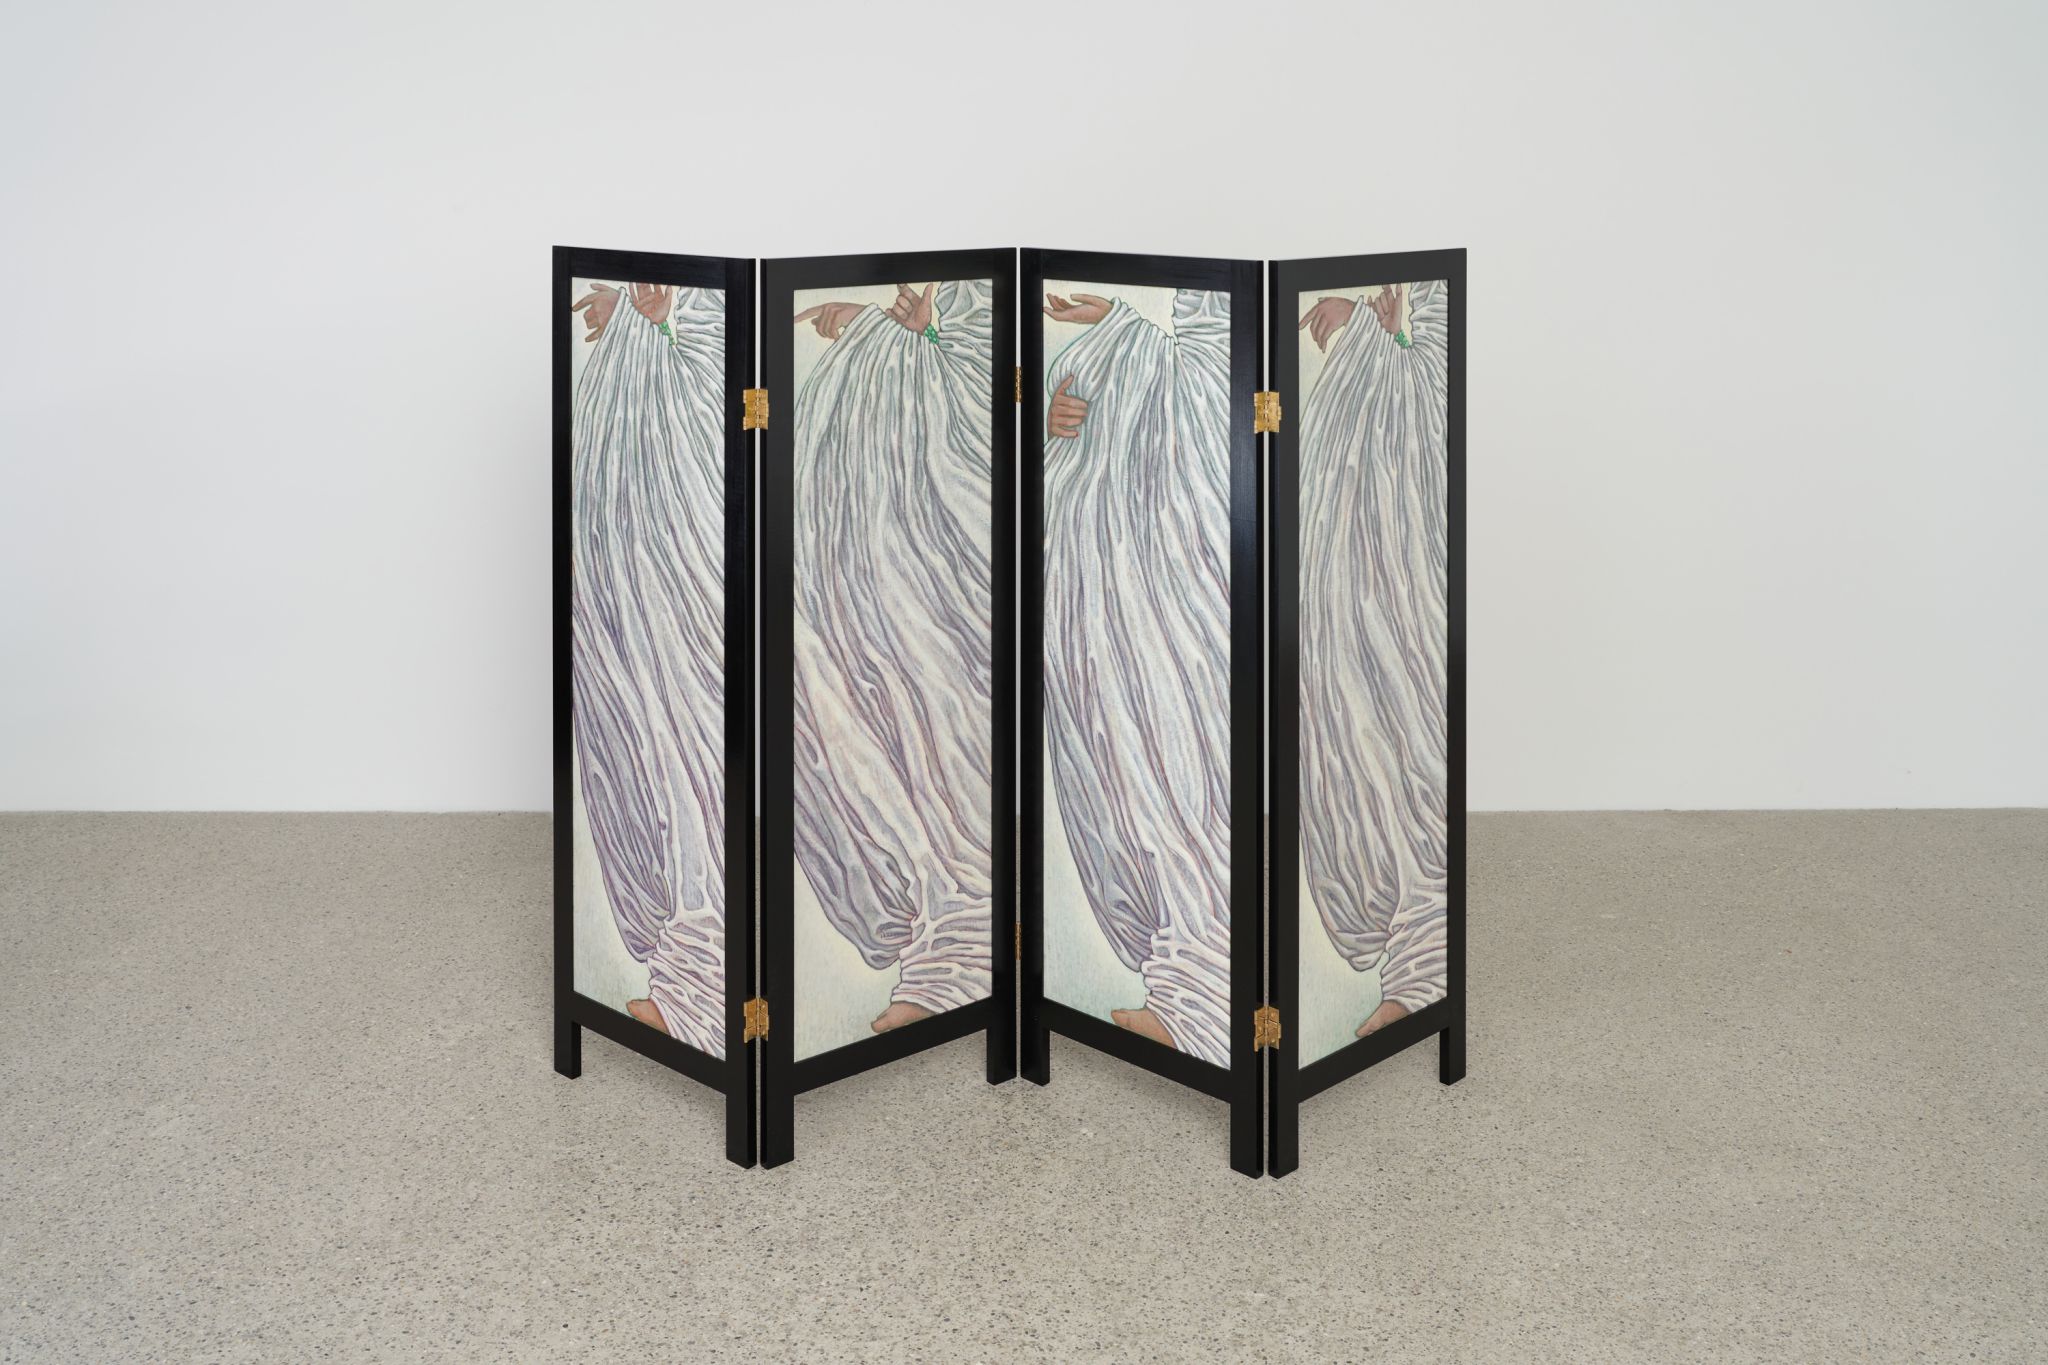 Yong Xiang Li, Parallel Support & Possess it in a Sleeve, 2023, Acrylic and varnish on gessoed linen mounted on HDF, painted beech, brass hinge, Open: 140 ⁠× ⁠200 ⁠× ⁠2 ⁠cm, Each of the four panels: 140 ⁠× ⁠50 ⁠× ⁠2 ⁠cm